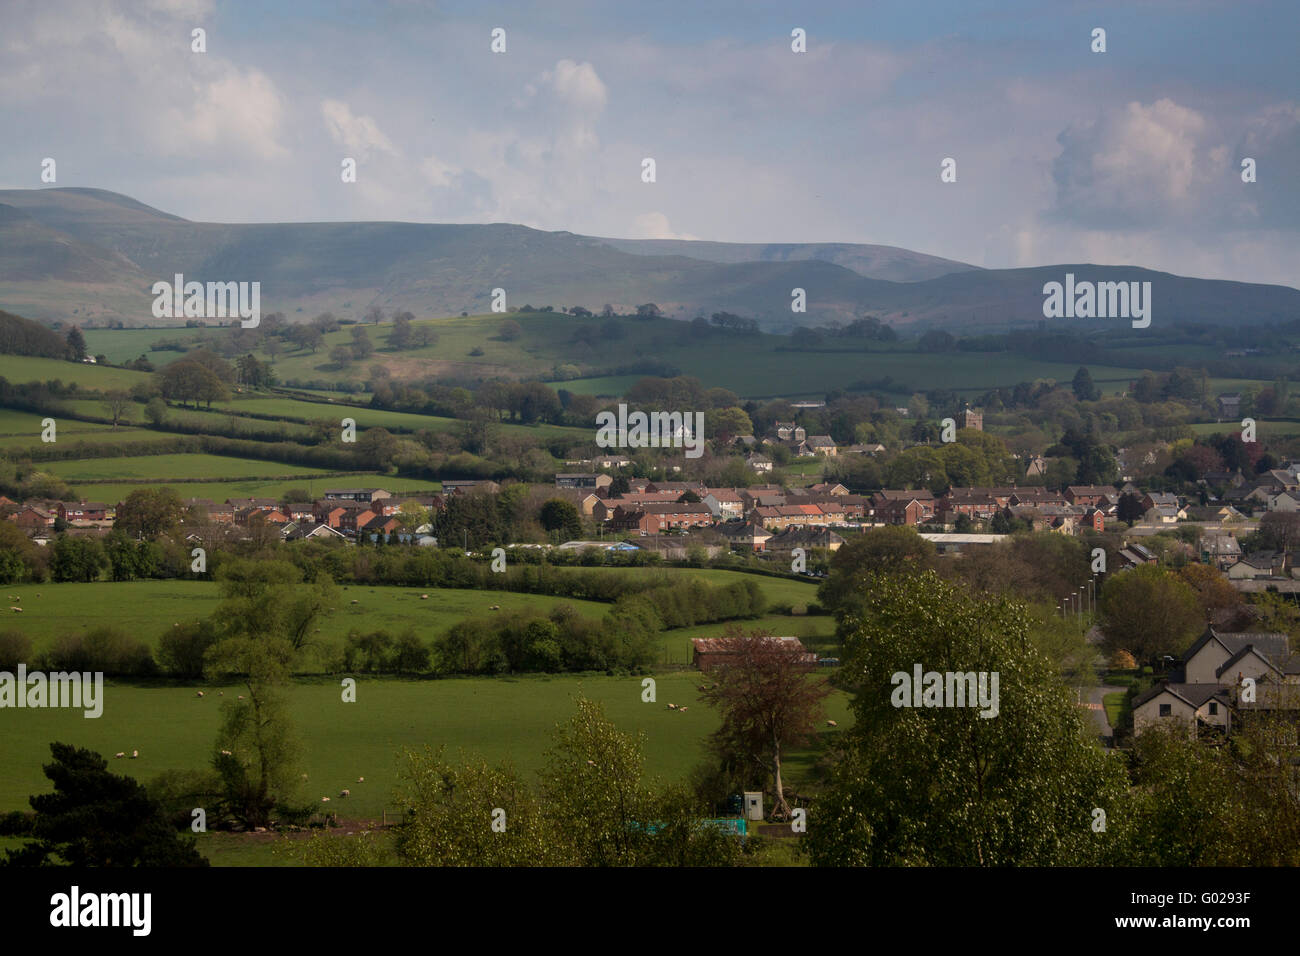 The town of Talgarth with the Black Mountains in background Brecon Beacons National Park Powys Mid Wales UK Stock Photo